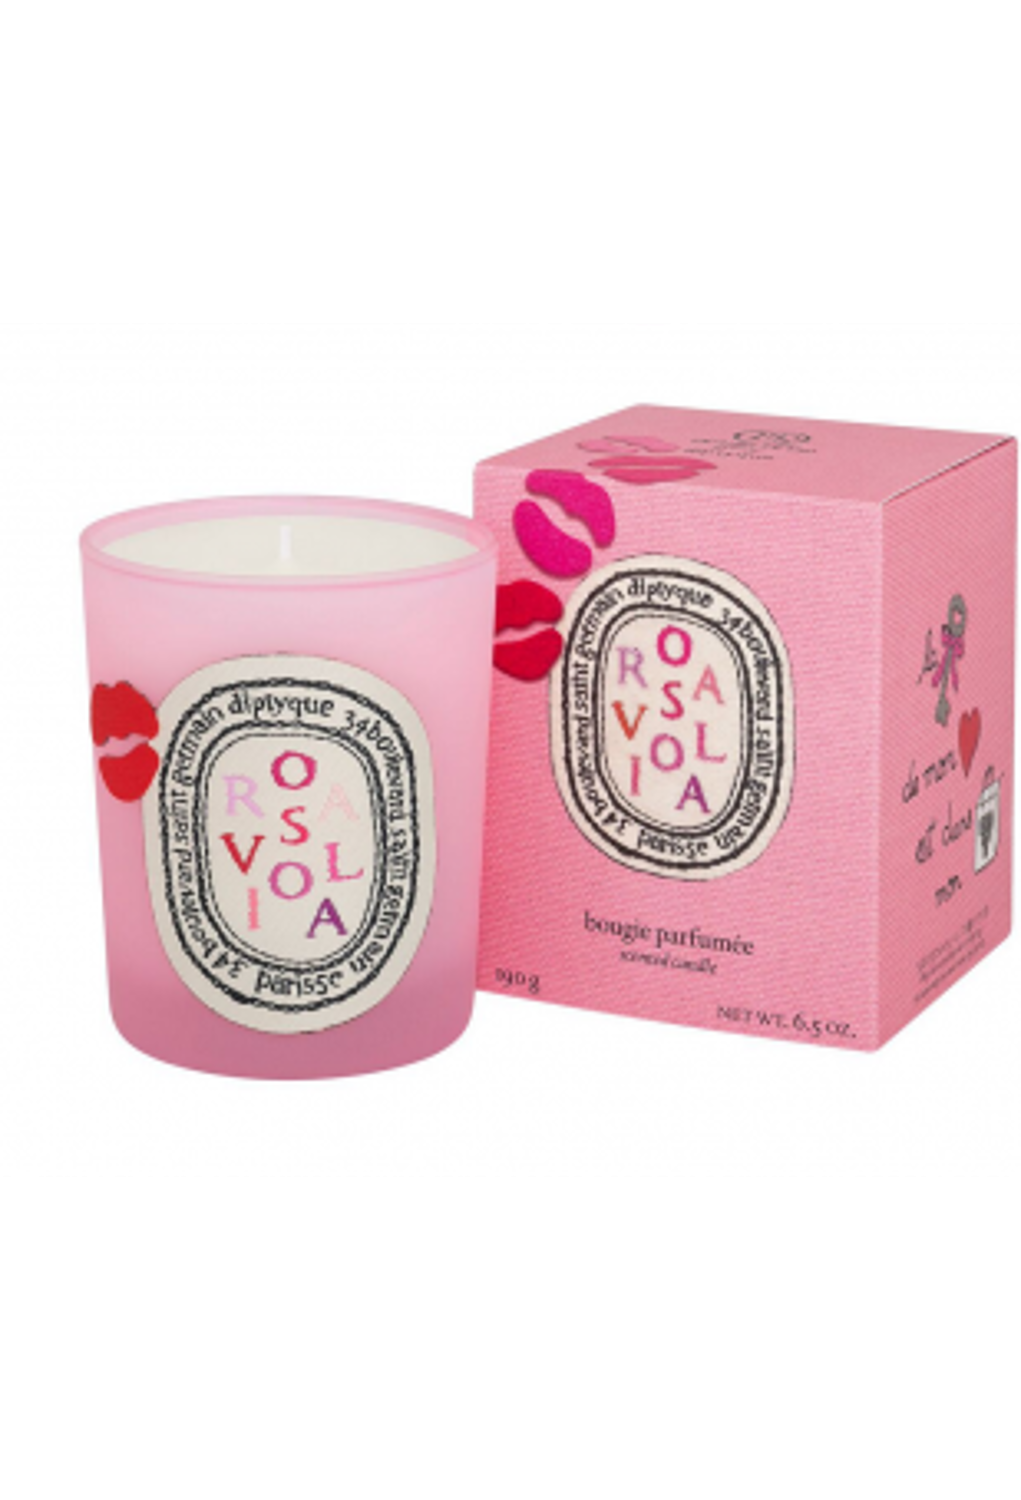 shop Diptyque  Candle: Diptyque scanted candle of 190g with the predominance of rose. Limited edition for Valentine's day in collaboration with the fashion designer Olympia Le-Tan. number 597